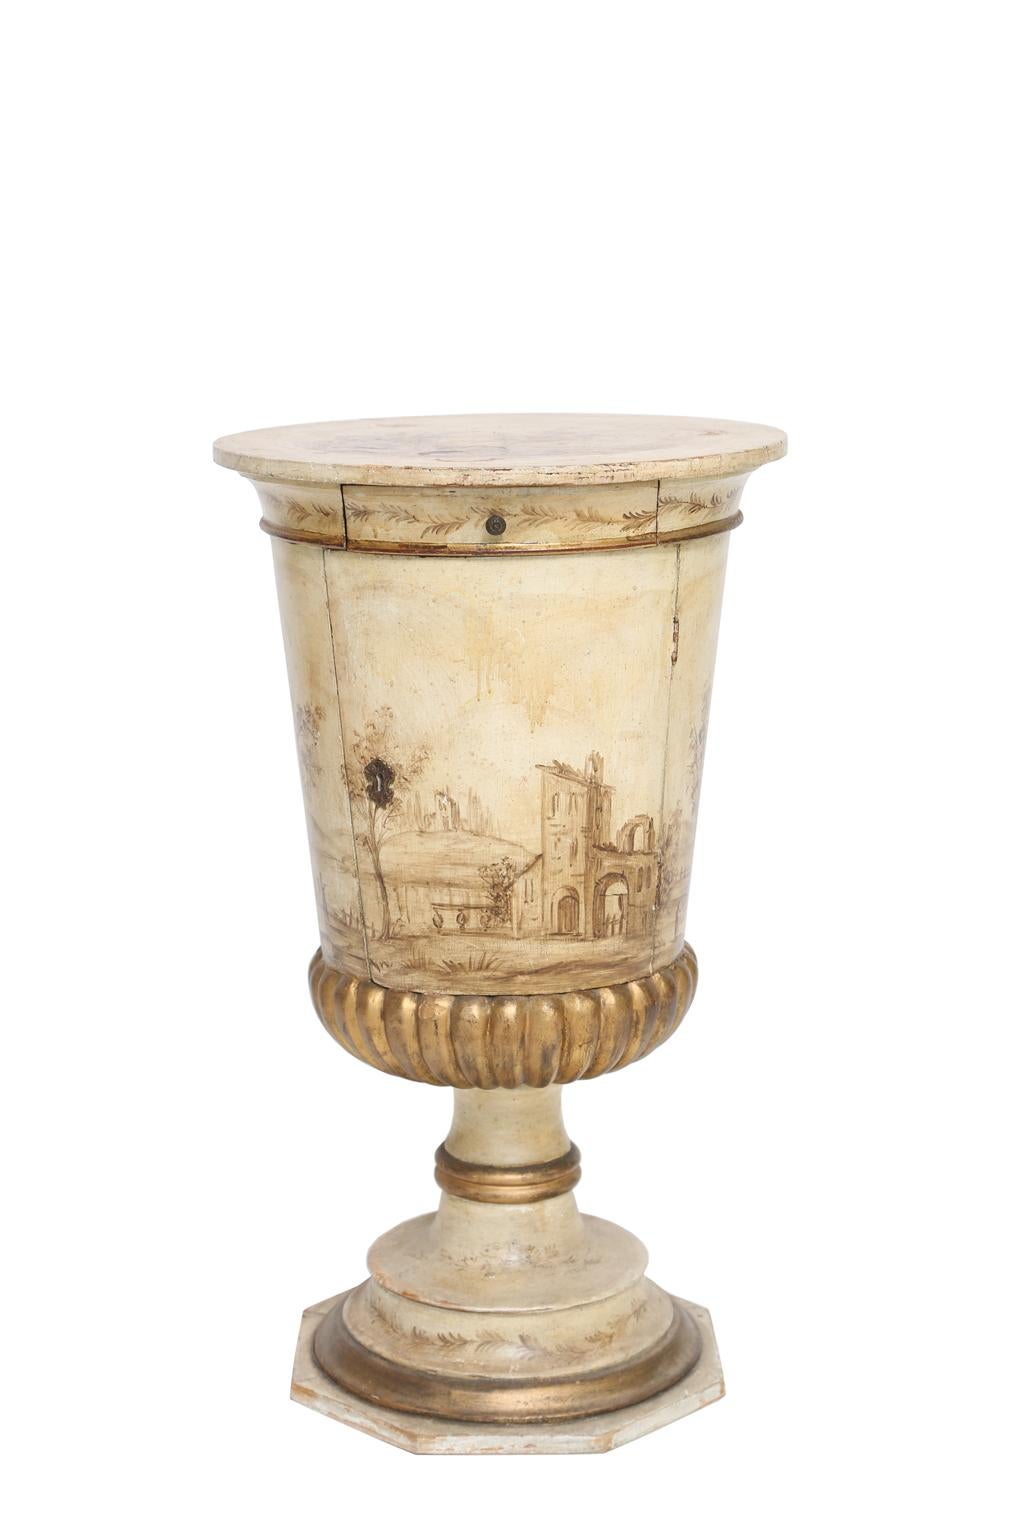 20th Century Painted Venetian Pot Stand Pedestal Table